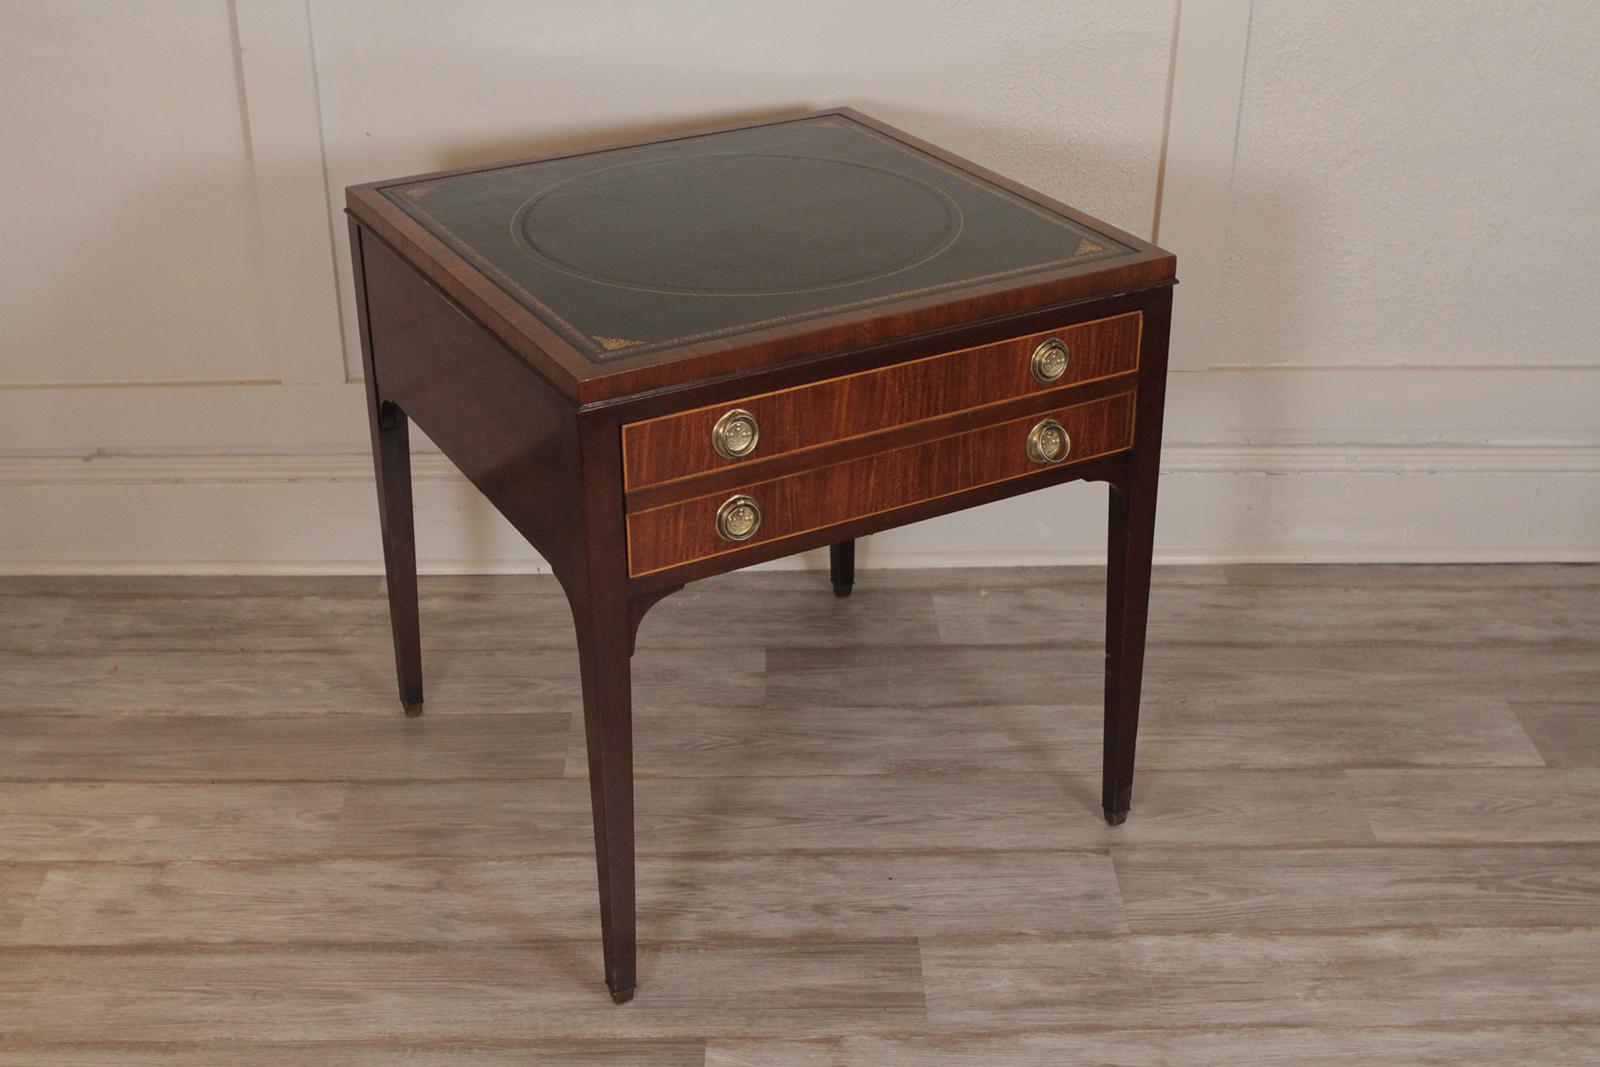 Kittinger leather top one drawer table. Elegant clean lines with hand gilt tooled dark green leather top. The drawer with polished brass Hepplewhite style handles. Dimensions: 26' W x 26” D x 27.5” H.